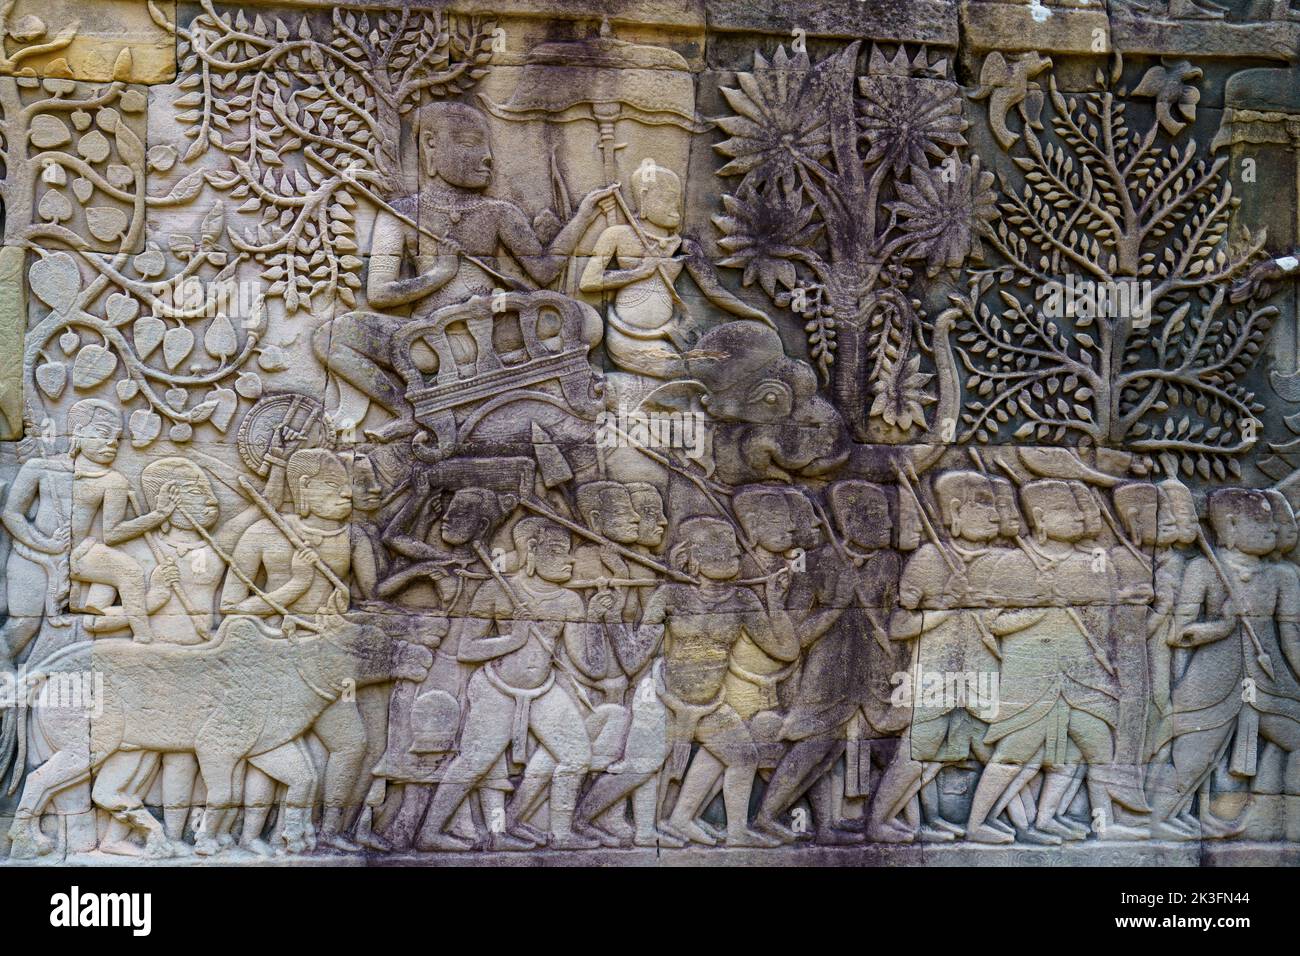 Cambodia. Siem Reap. The archaeological park of Angkor. A bas relief at Bayon Temple 12th century Hindu temple Stock Photo